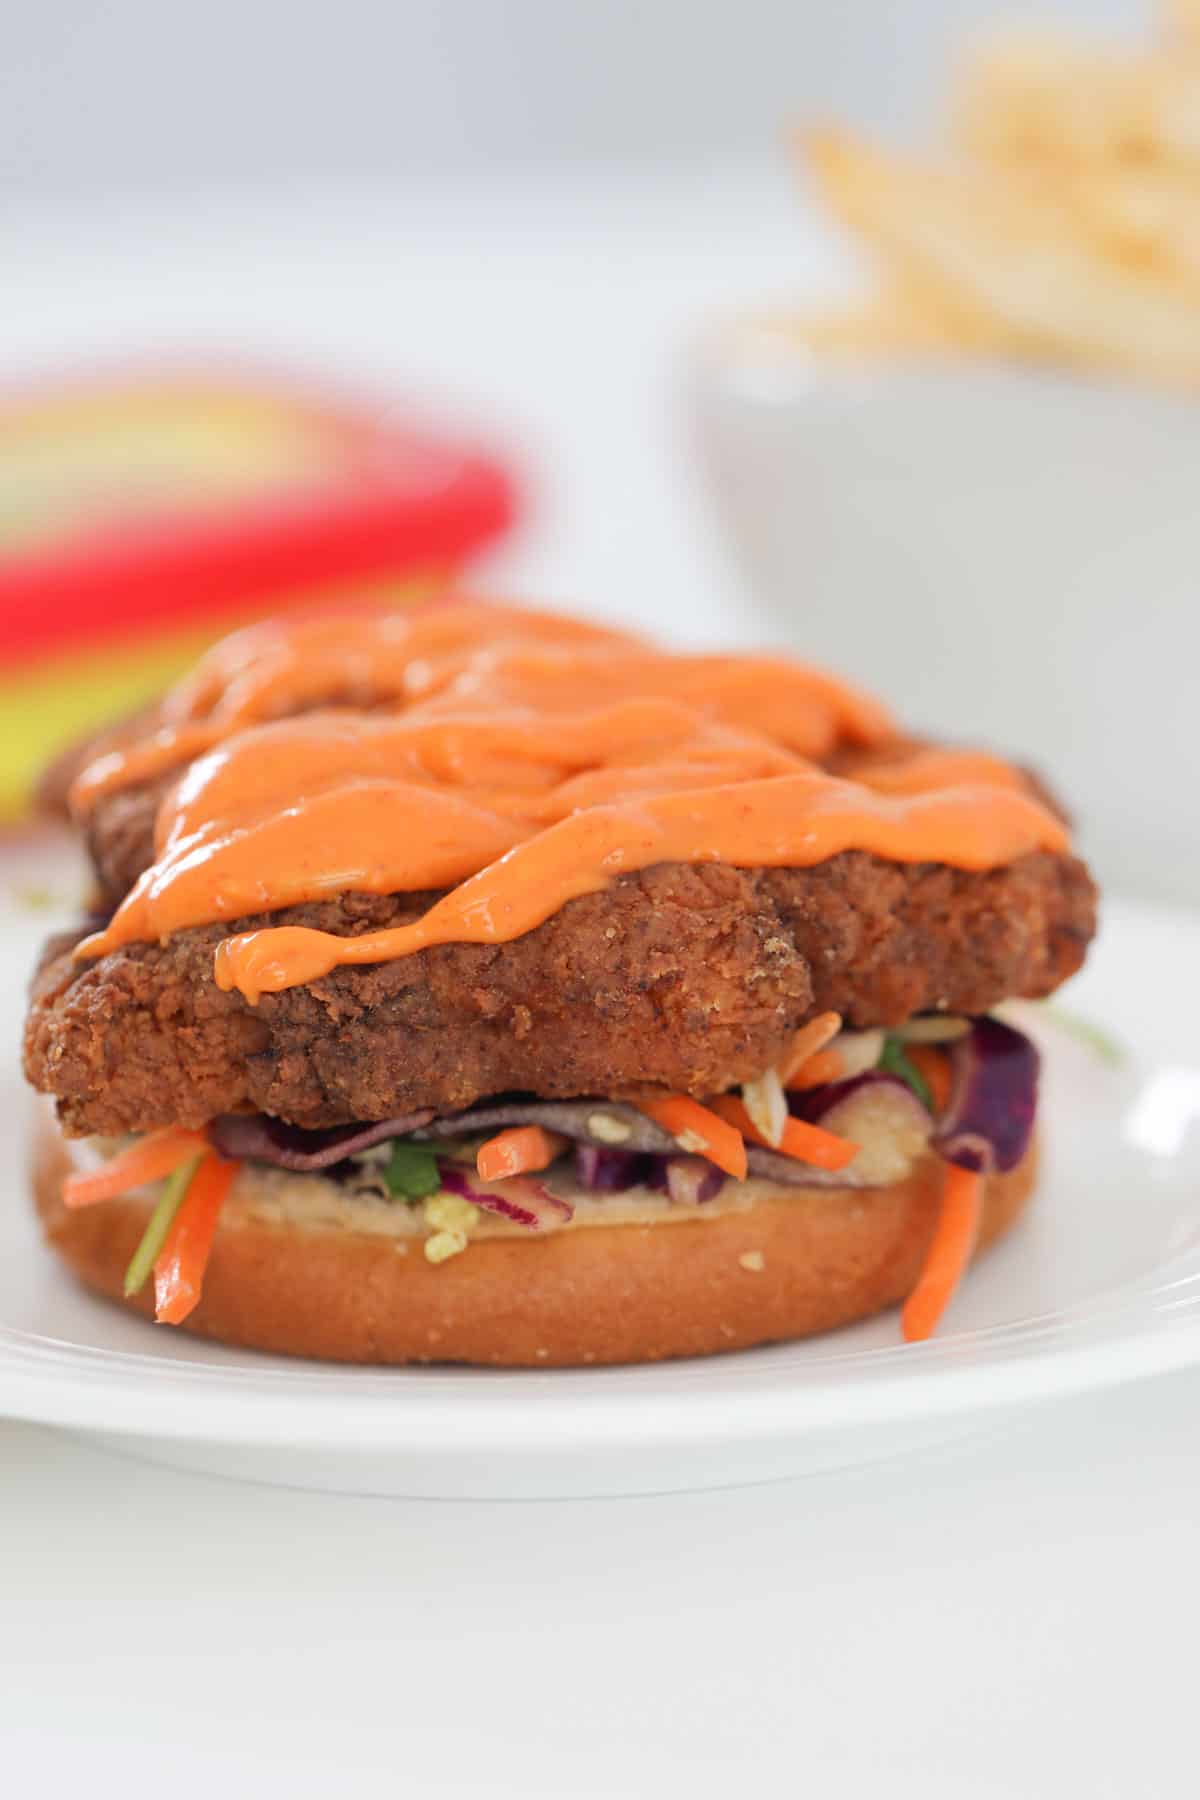 Korean mayo on top of a crunchy fried chicken thigh with slaw.